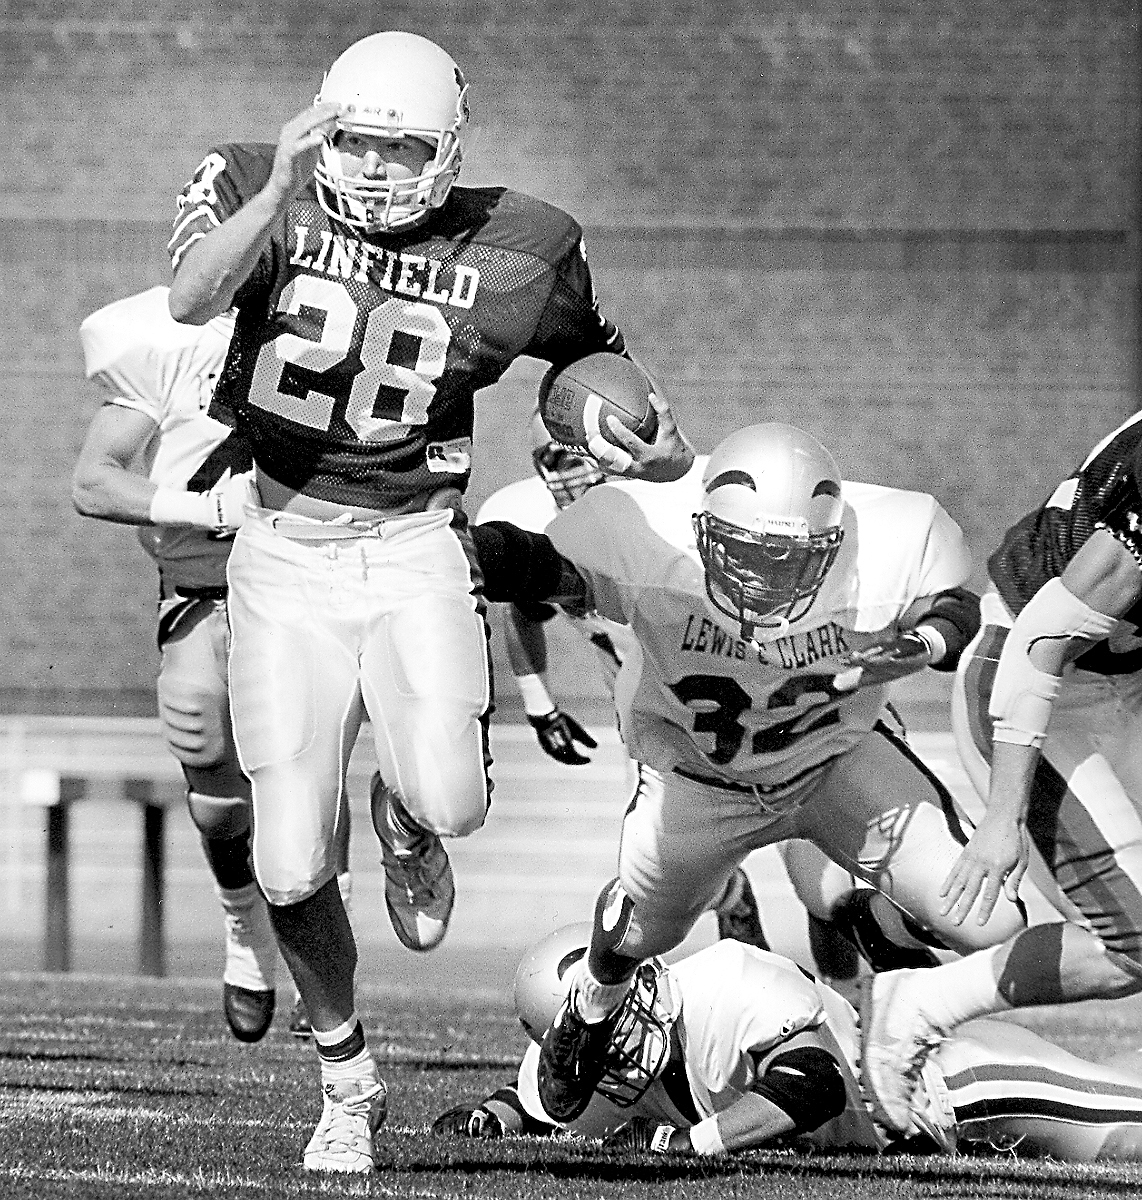 Crescent graduate Gary McGarvie (28) will be inducted into the Linfield Athletics Hall of Fame on Saturday in McMinnville